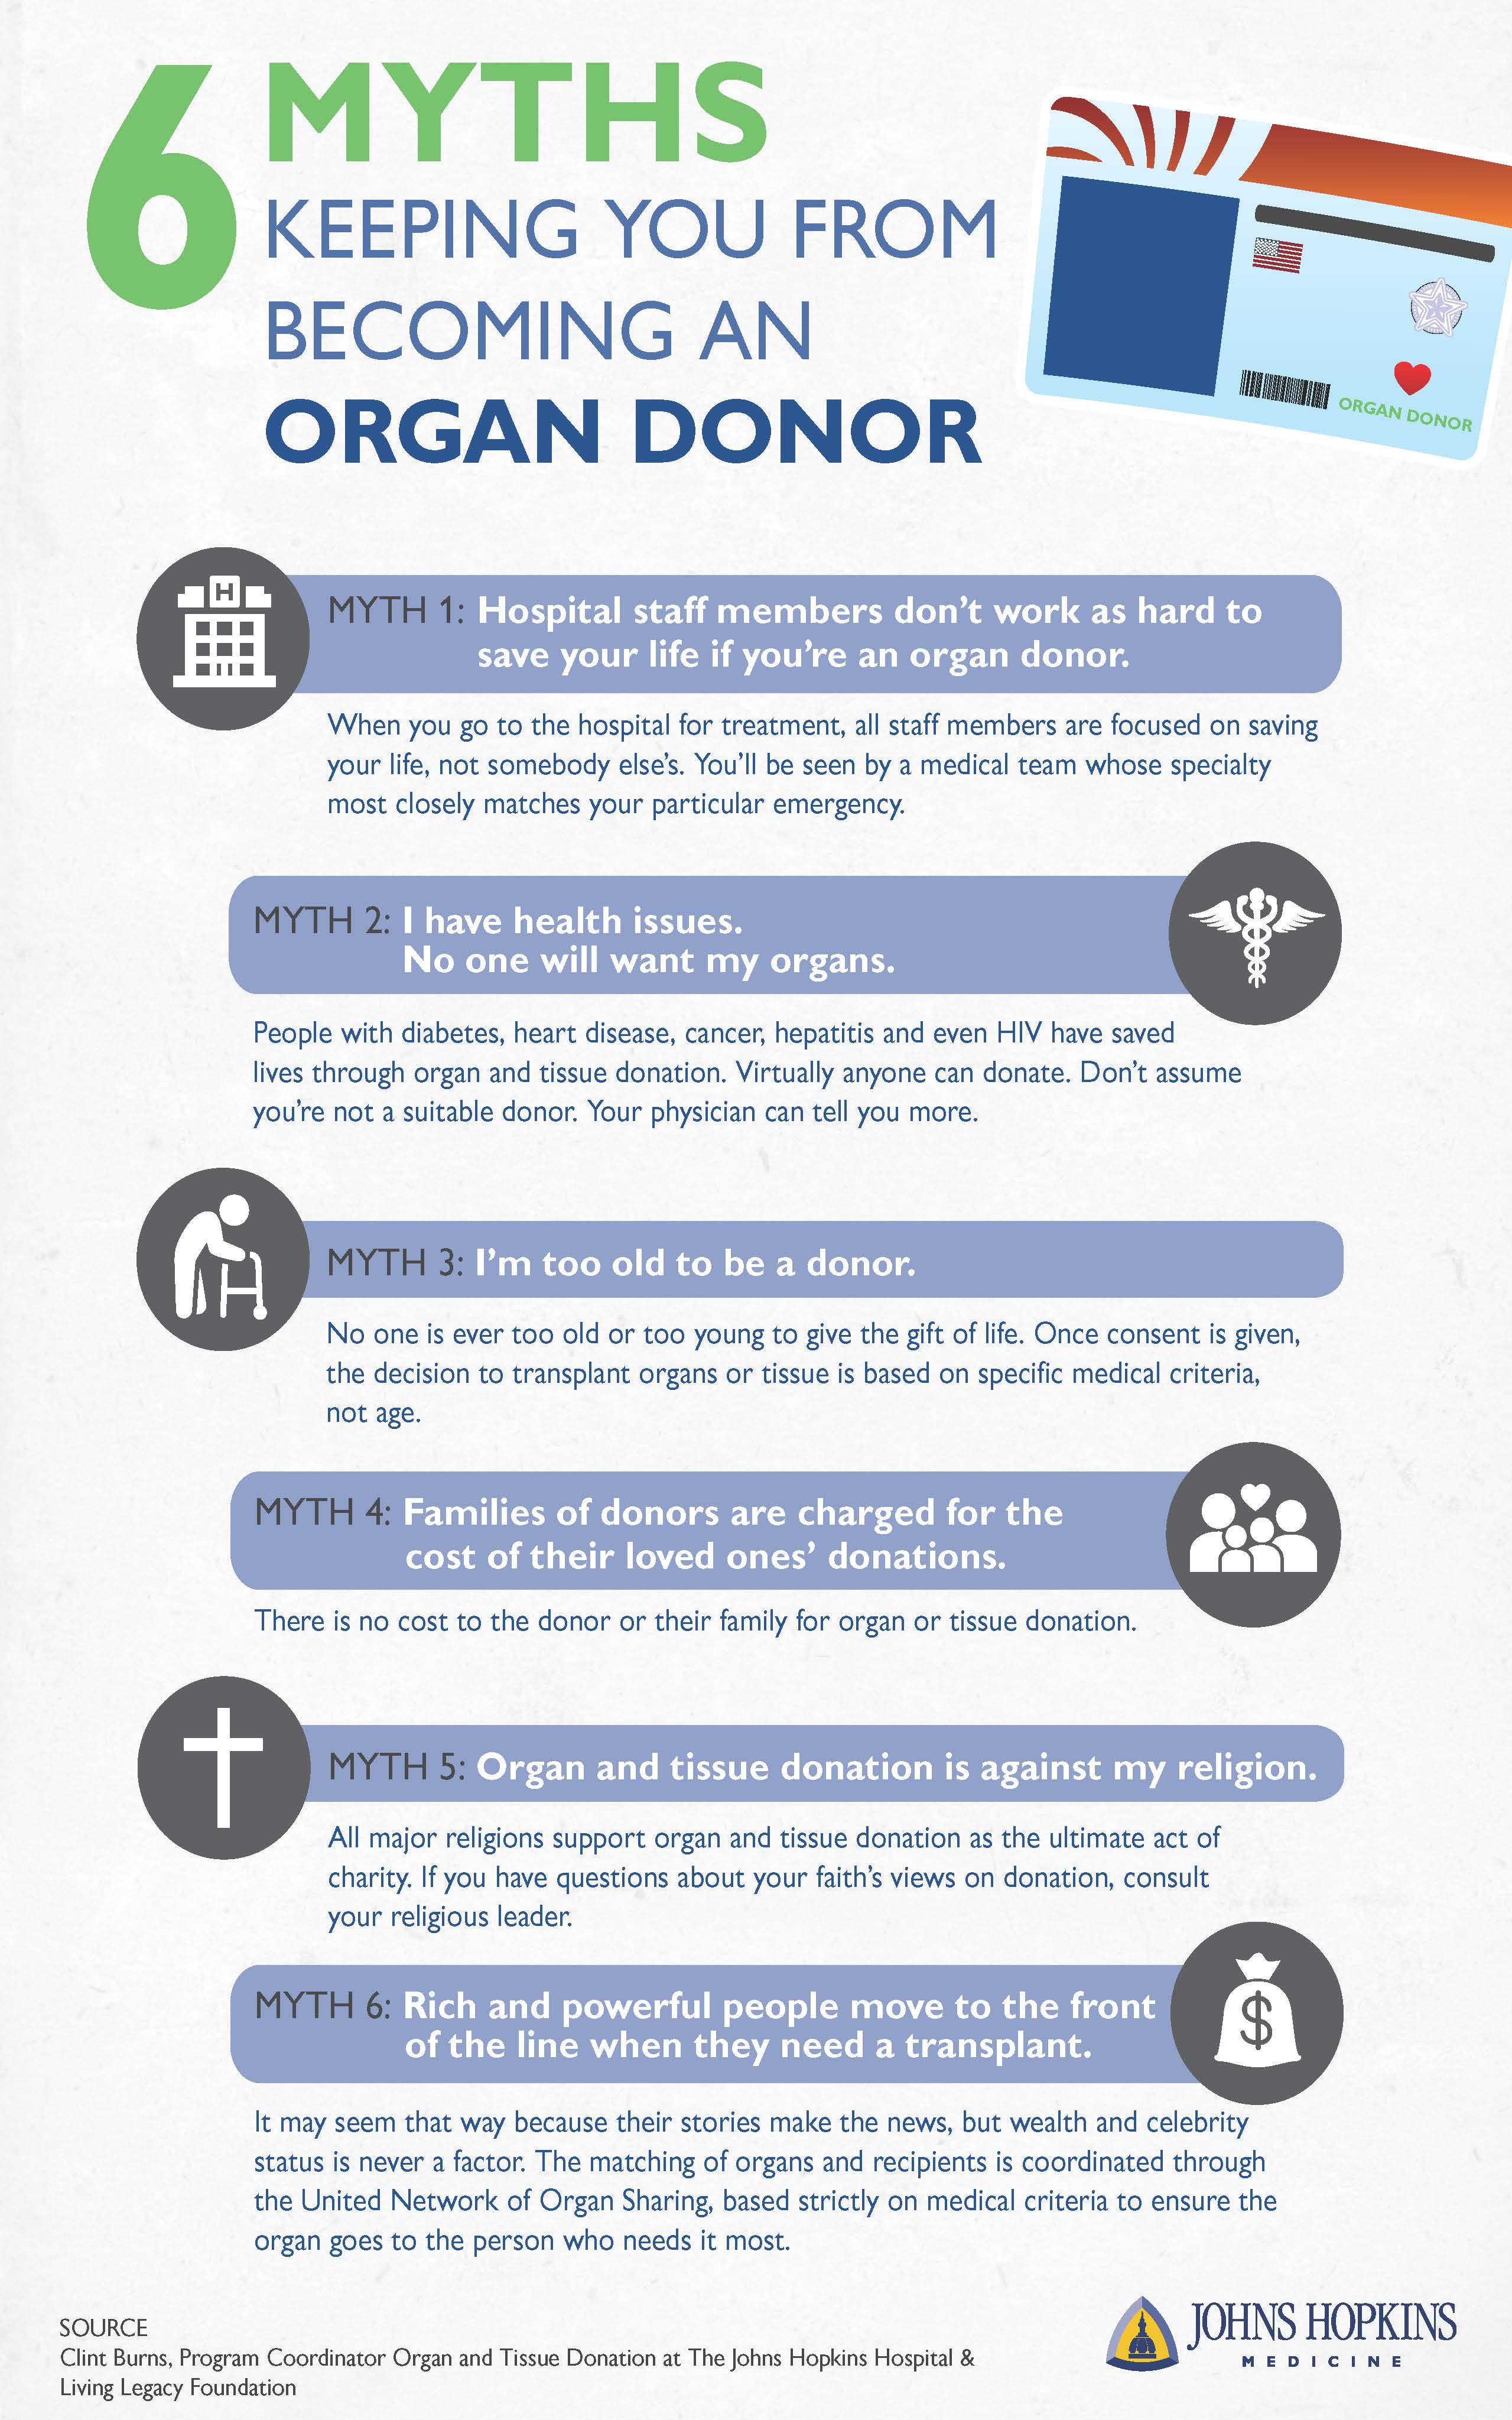 6 Myths Keeping You from Becoming an Organ Donor infographic